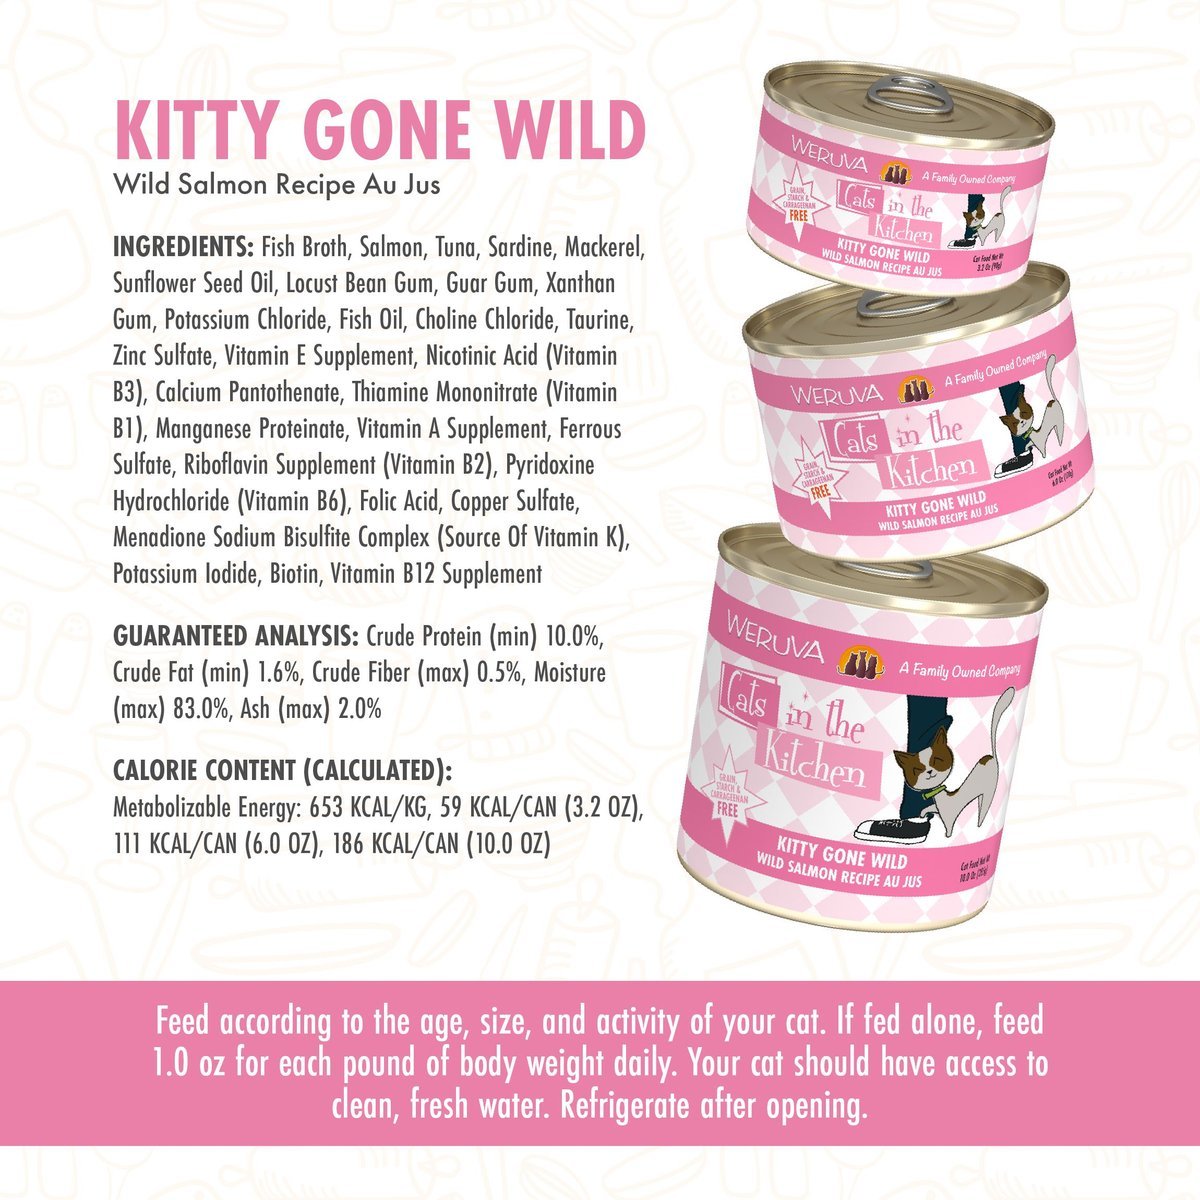 Weruva Cats In The Kitchen Canned Cat Food 6oz Kitty Gone Wild